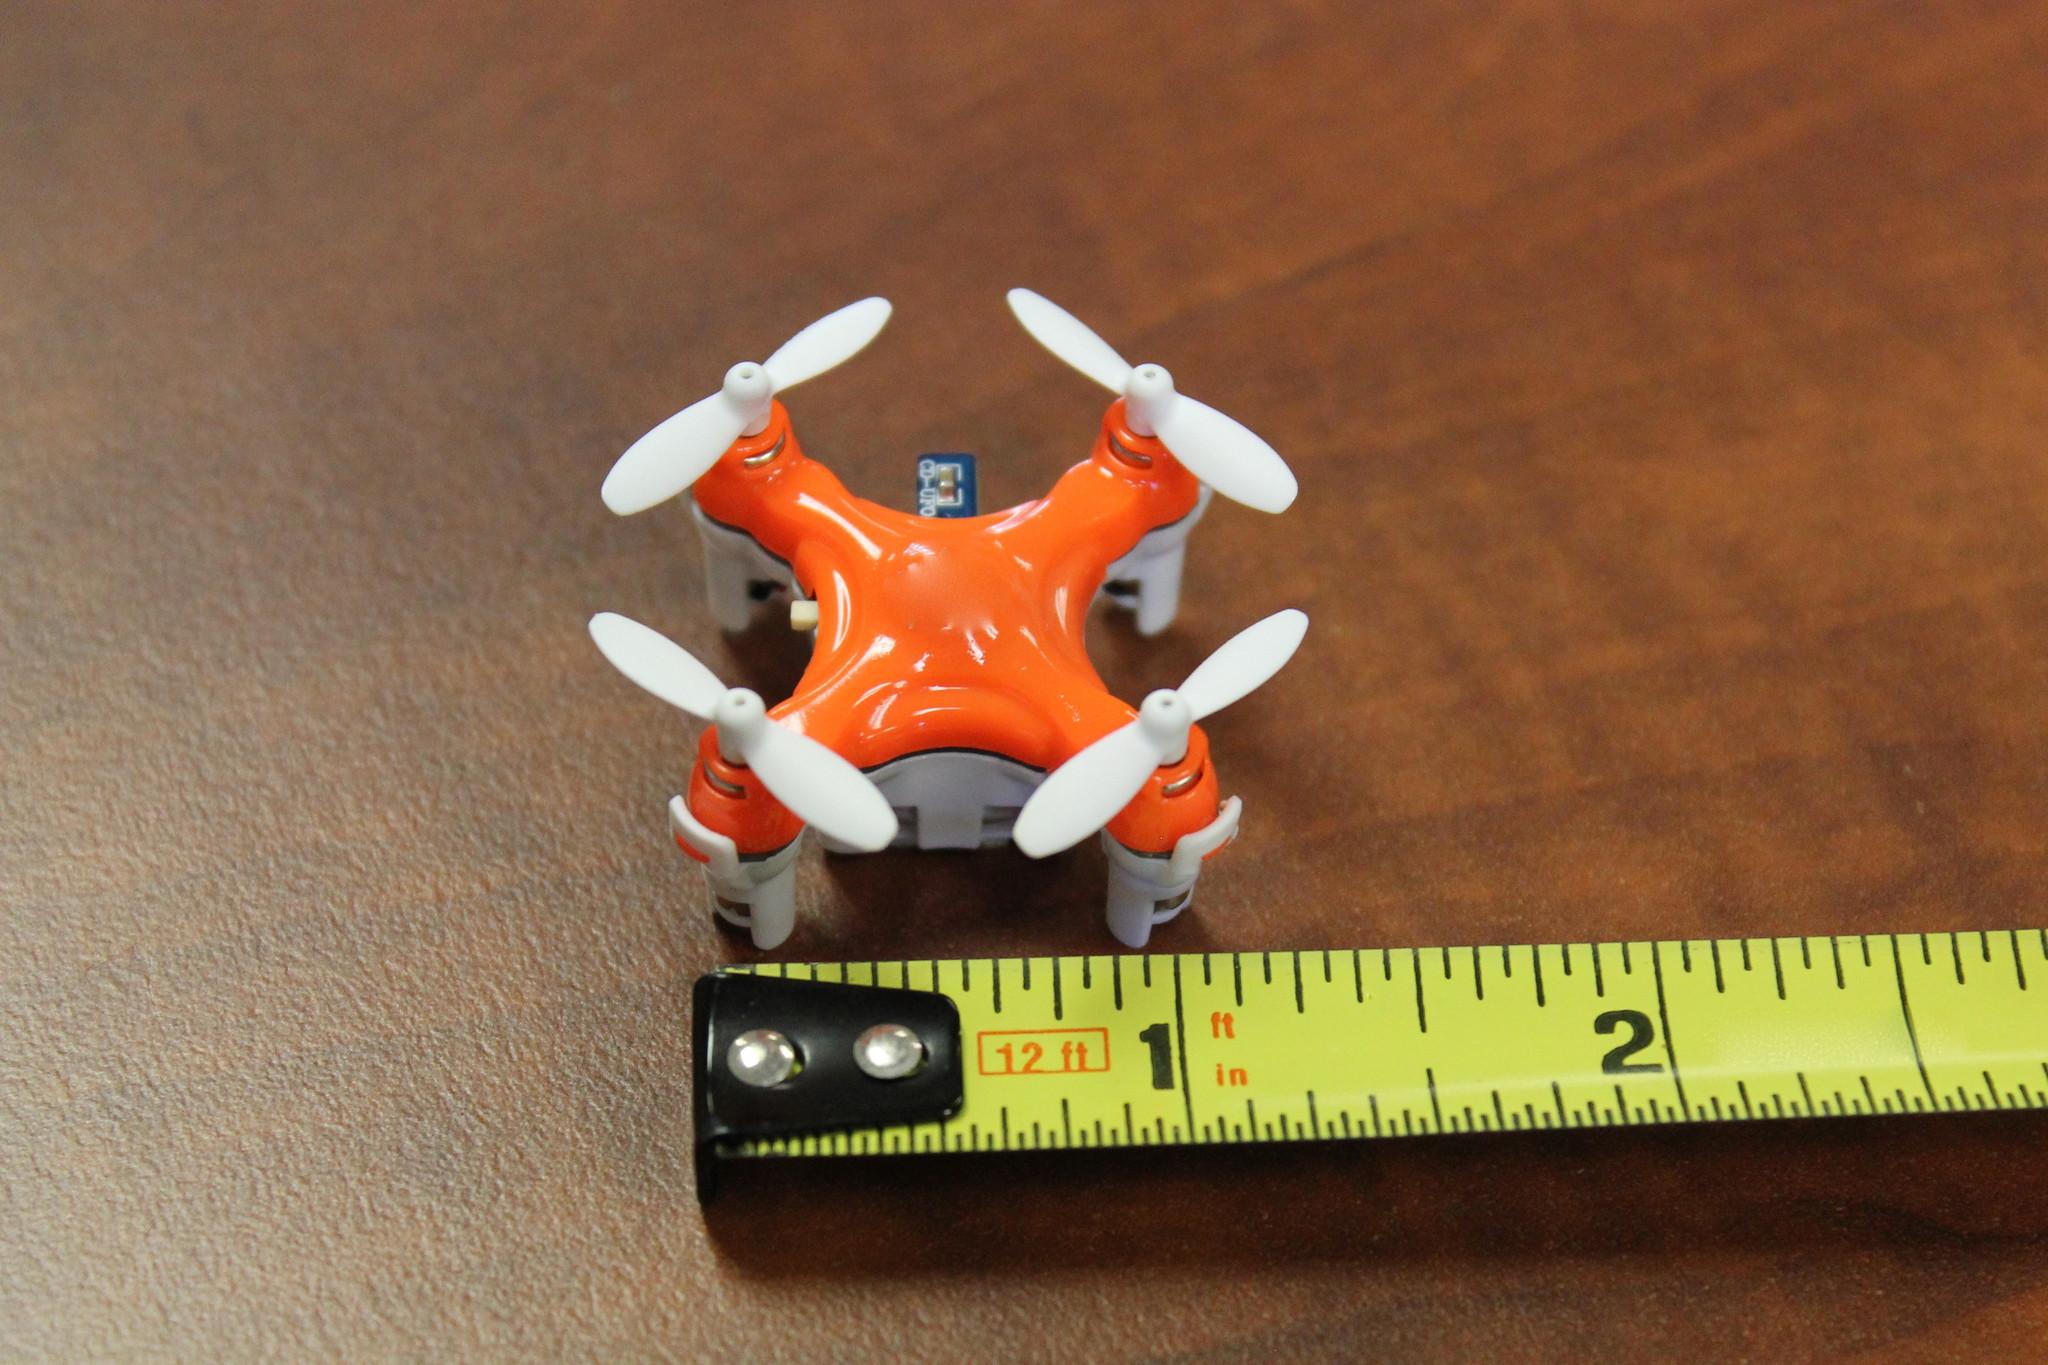 worlds smallest drone aerius 2015 img 4135